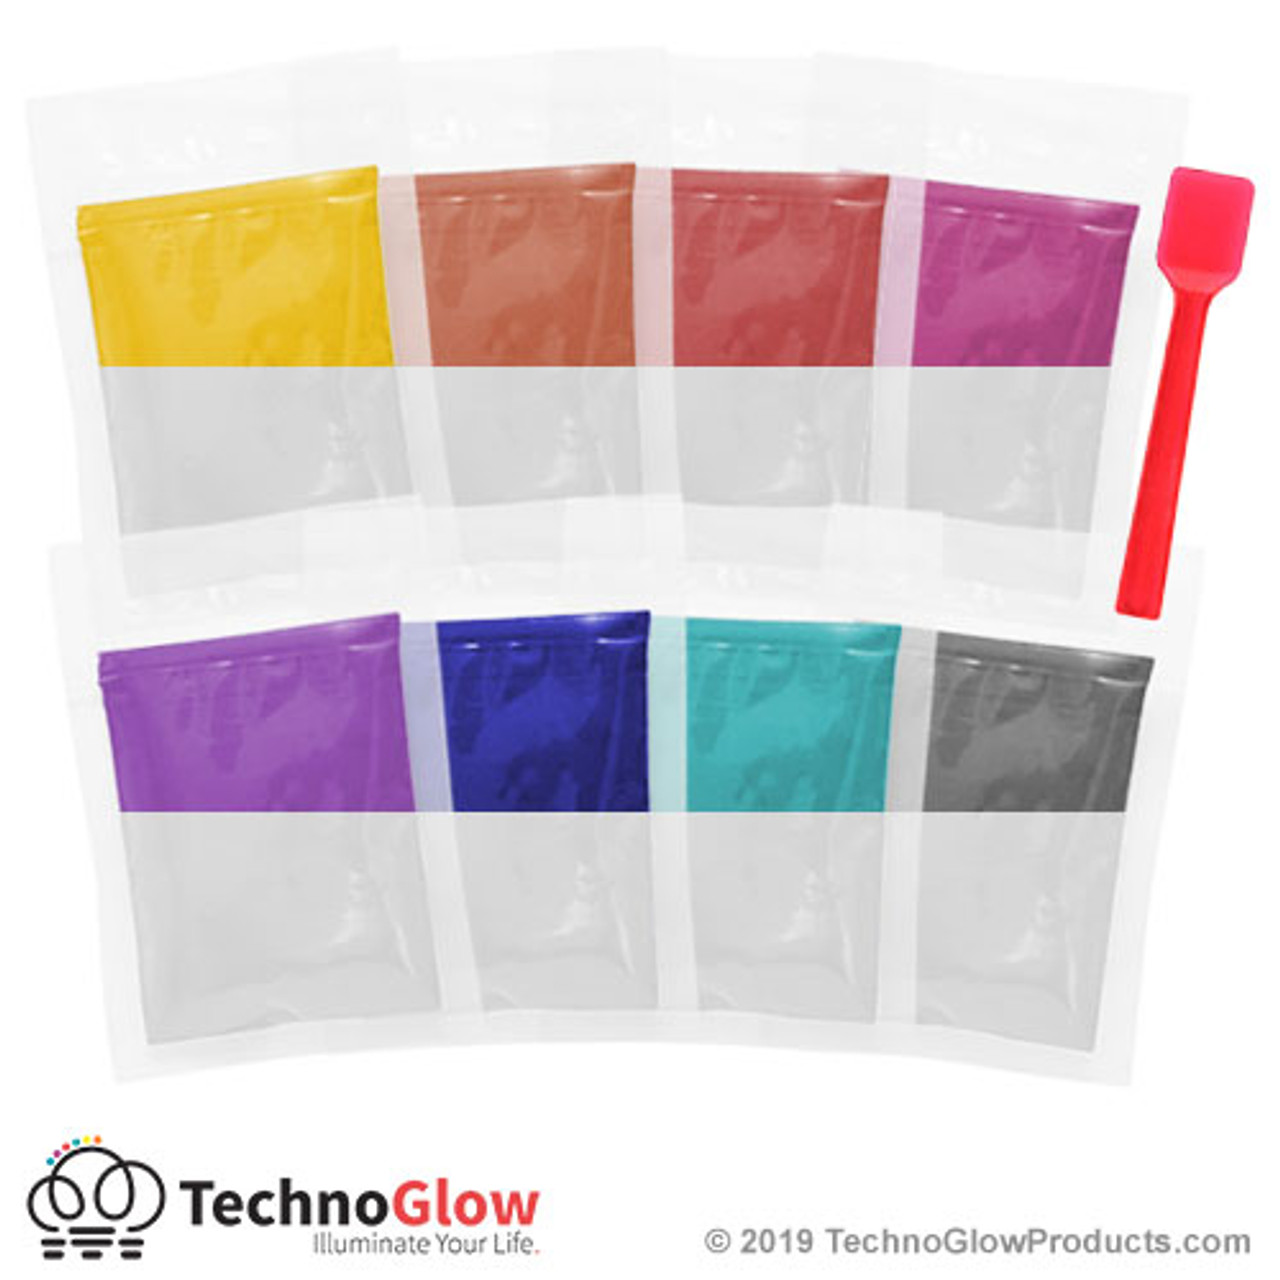 THERMOCHROMIC TEMPERATURE COLOUR CHANGING PIGMENT POWDER - BLUE TO CLEAR